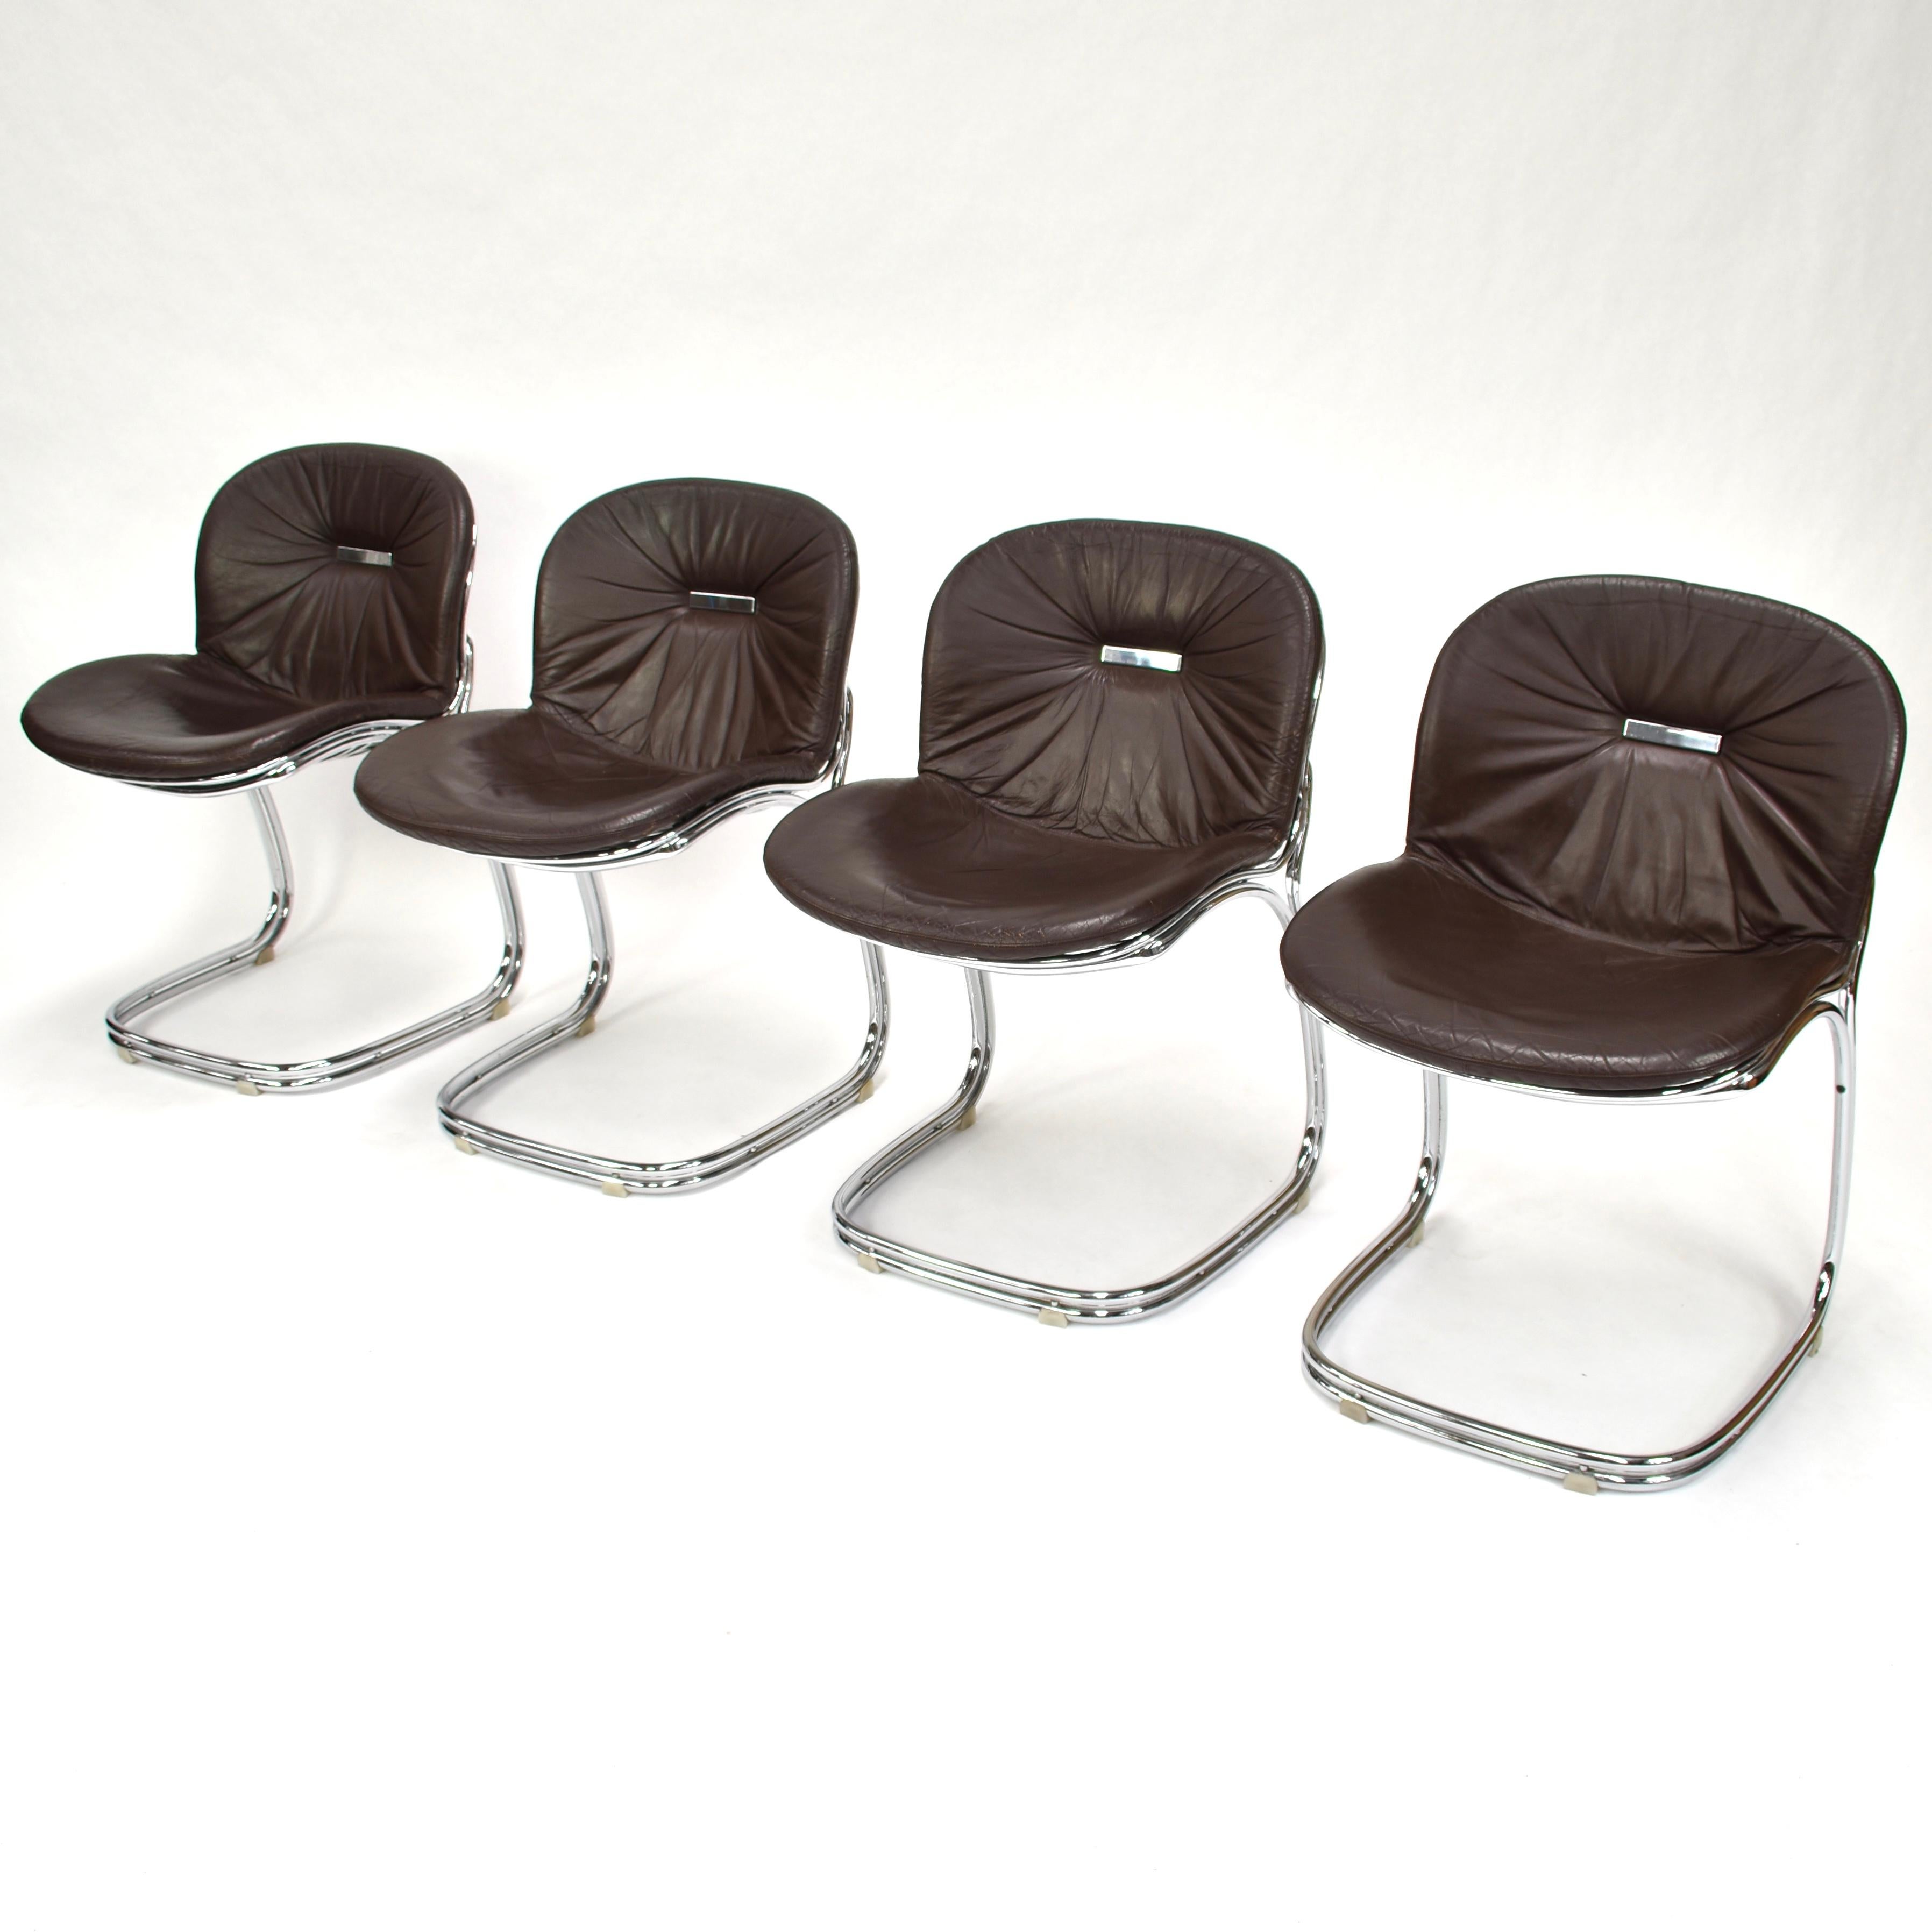 Set of four chocolate brown leather dining chairs by Gastone Rinaldi for RIMA, Italy, 1970s.
These chairs still remain in a very good (excellent) condition.

Manufacturer: RIMA

Designer: Gastone Rinaldi

Model: Sabrina dining